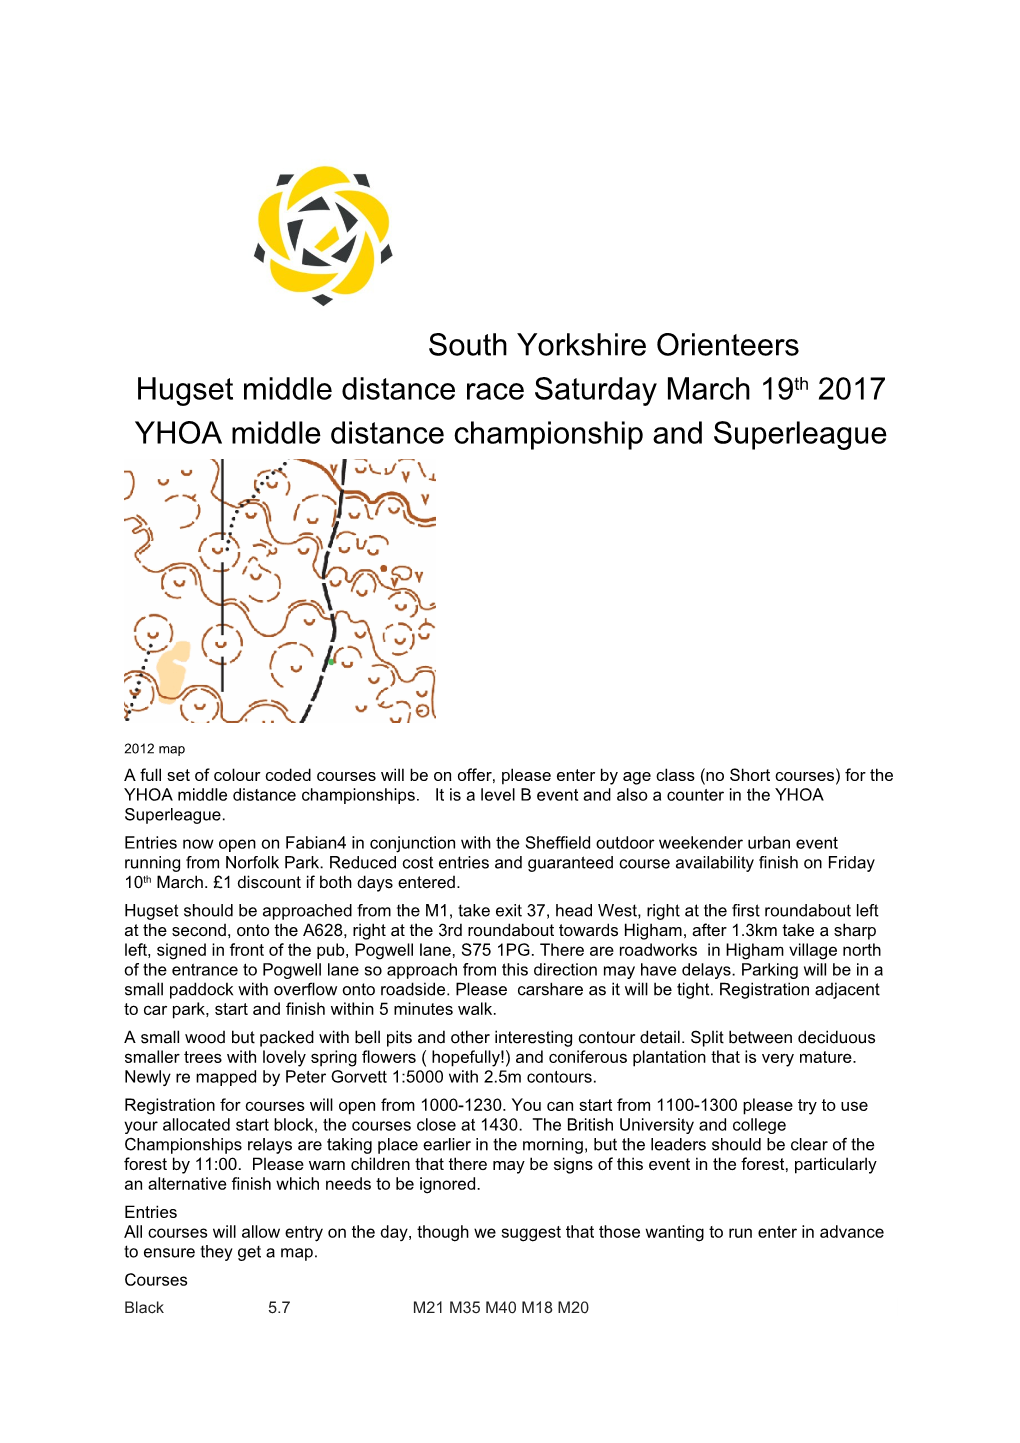 YHOA Middle Distance Championship and Superleague